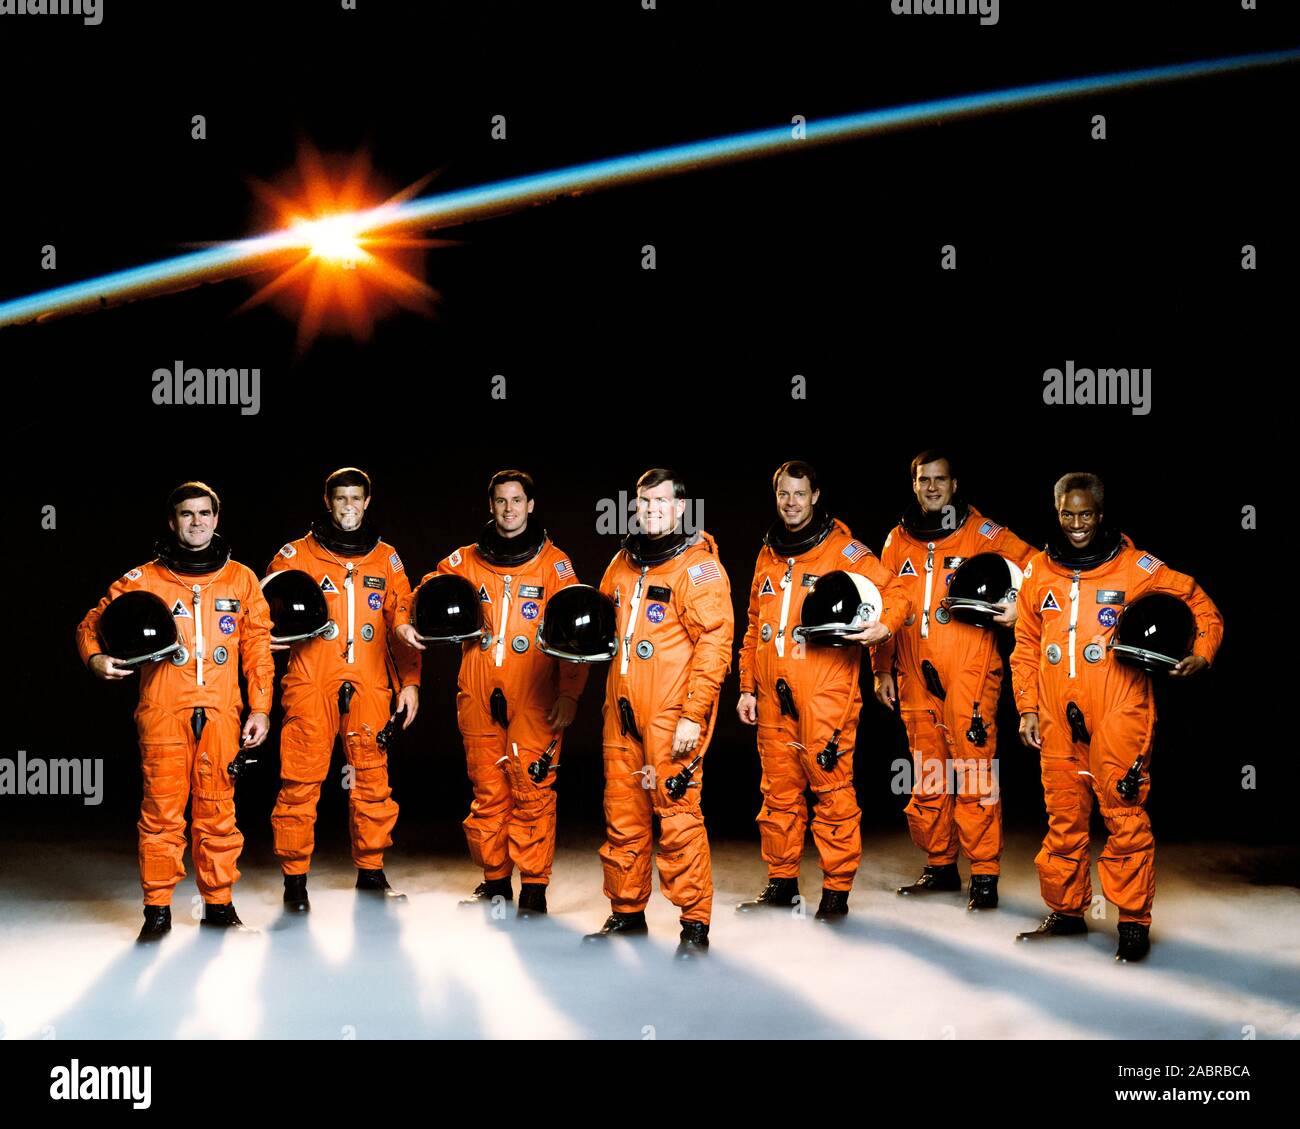 (December 1990) --- NASA's STS-39 crew members, wearing their partial pressure launch and entry suits, pose for traditional portrait. Left to right are astronauts Charles L. (Lacy) Veach, Donald R. McMonagle, Gregory J. Harbaugh, Michael L. Coats, L. Blaine Hammond Jr., Richard J. Hieb and Guion S. Bluford Jr. Coats is mission commander; Hammond, pilot, and the others are mission specialists. Stock Photo